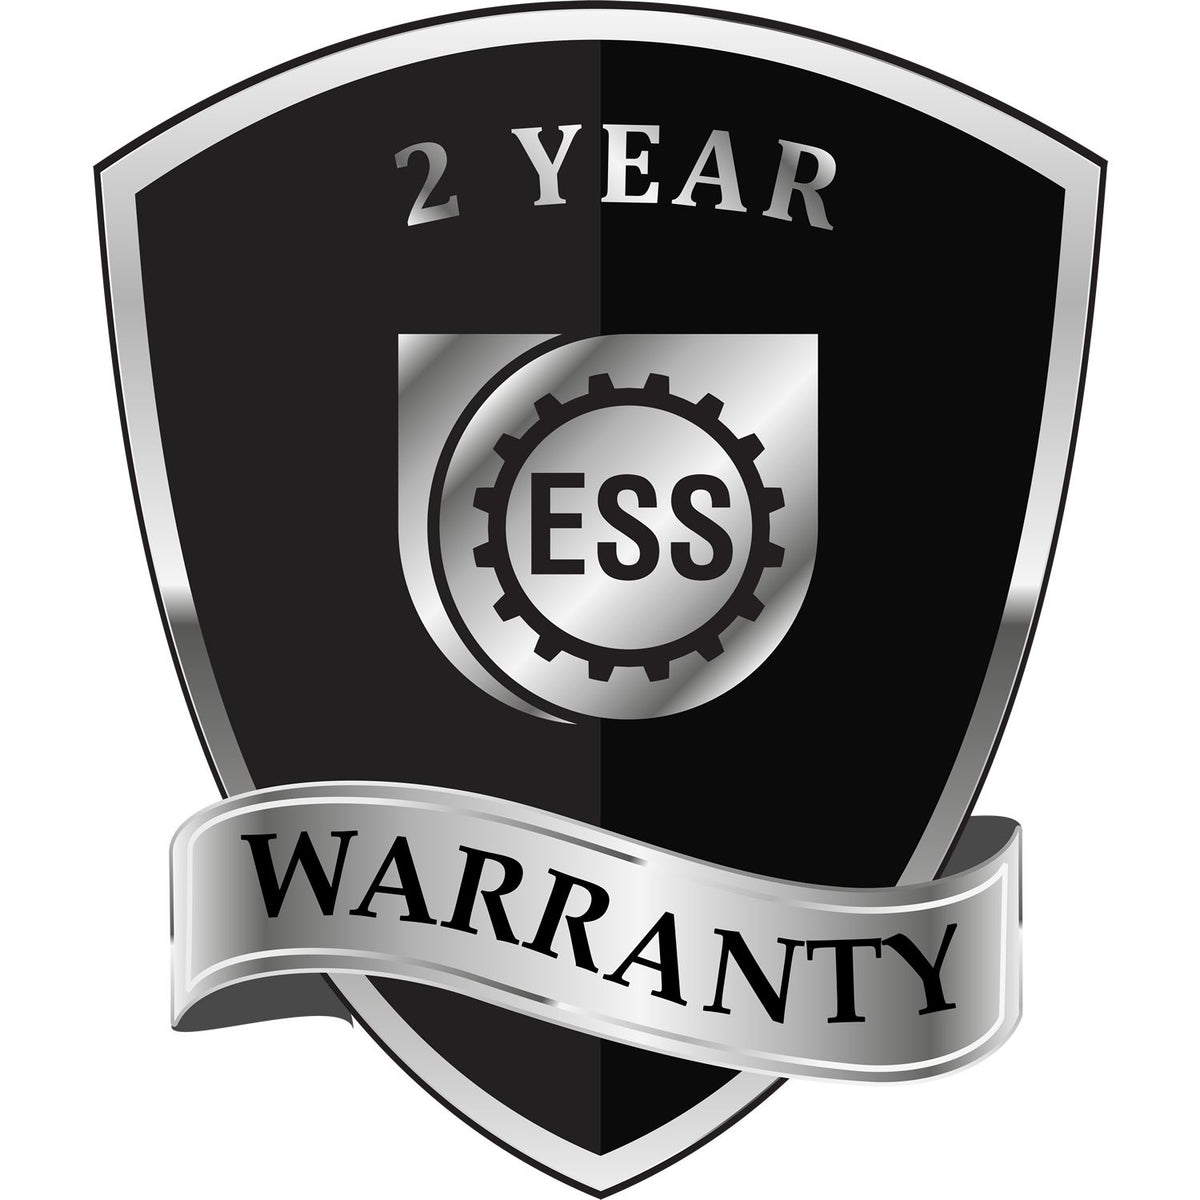 A badge or emblem showing a warranty icon for the Handheld Maine Land Surveyor Seal